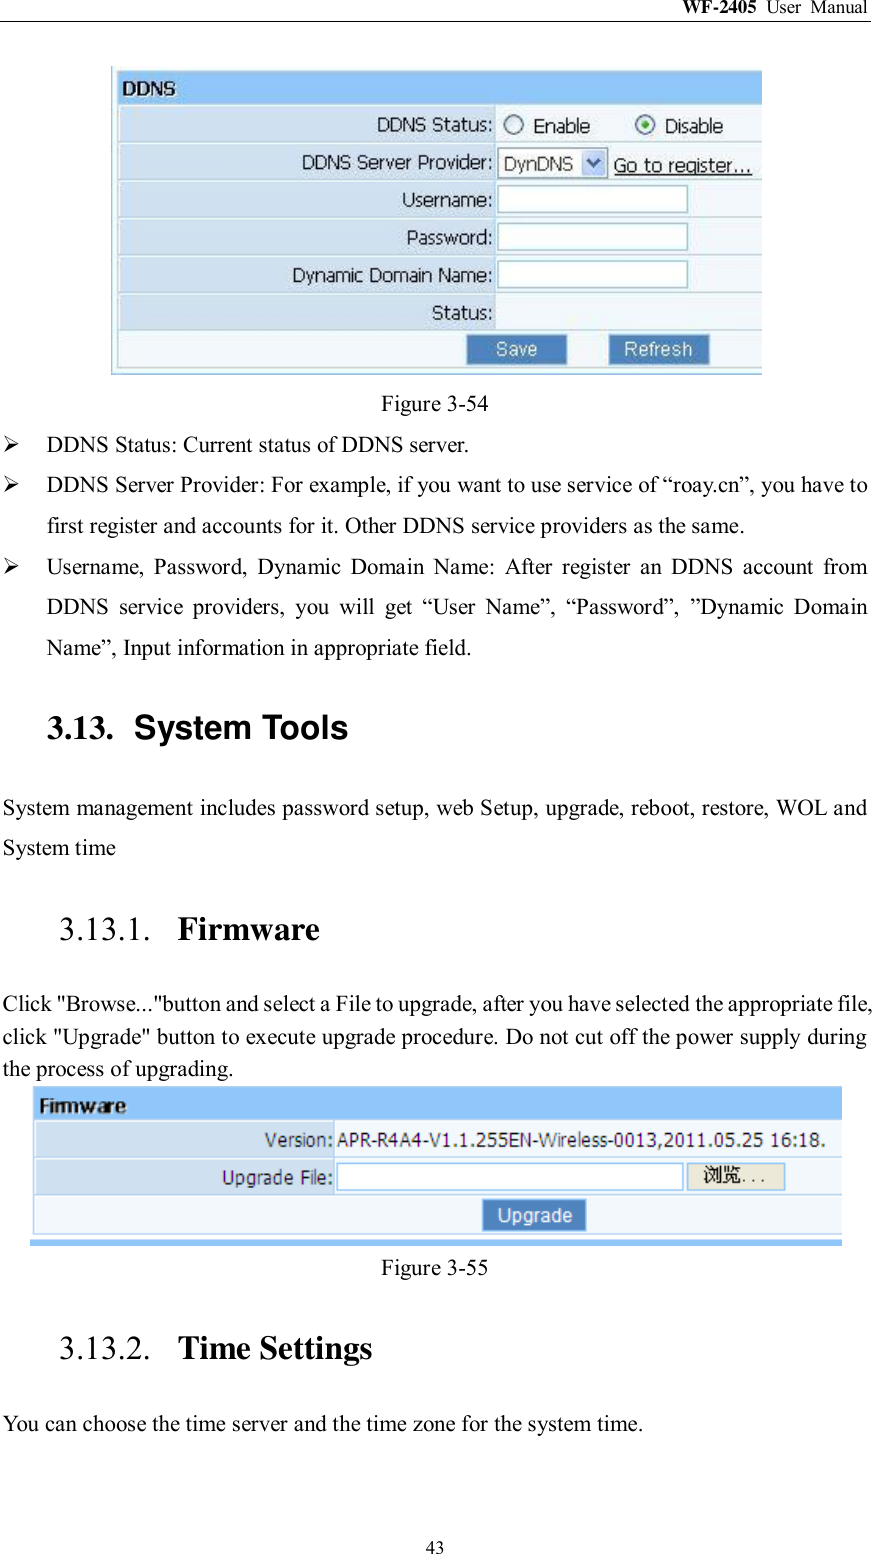 WF-2405  User  Manual  43  Figure 3-54  DDNS Status: Current status of DDNS server.  DDNS Server Provider: For example, if you want to use service of “roay.cn”, you have to first register and accounts for it. Other DDNS service providers as the same.  Username,  Password,  Dynamic  Domain  Name:  After  register  an  DDNS  account  from DDNS  service  providers,  you  will  get  “User  Name”,  “Password”,  ”Dynamic  Domain Name”, Input information in appropriate field. 3.13.  System Tools System management includes password setup, web Setup, upgrade, reboot, restore, WOL and System time 3.13.1. Firmware Click &quot;Browse...&quot;button and select a File to upgrade, after you have selected the appropriate file, click &quot;Upgrade&quot; button to execute upgrade procedure. Do not cut off the power supply during the process of upgrading.  Figure 3-55 3.13.2. Time Settings You can choose the time server and the time zone for the system time. 